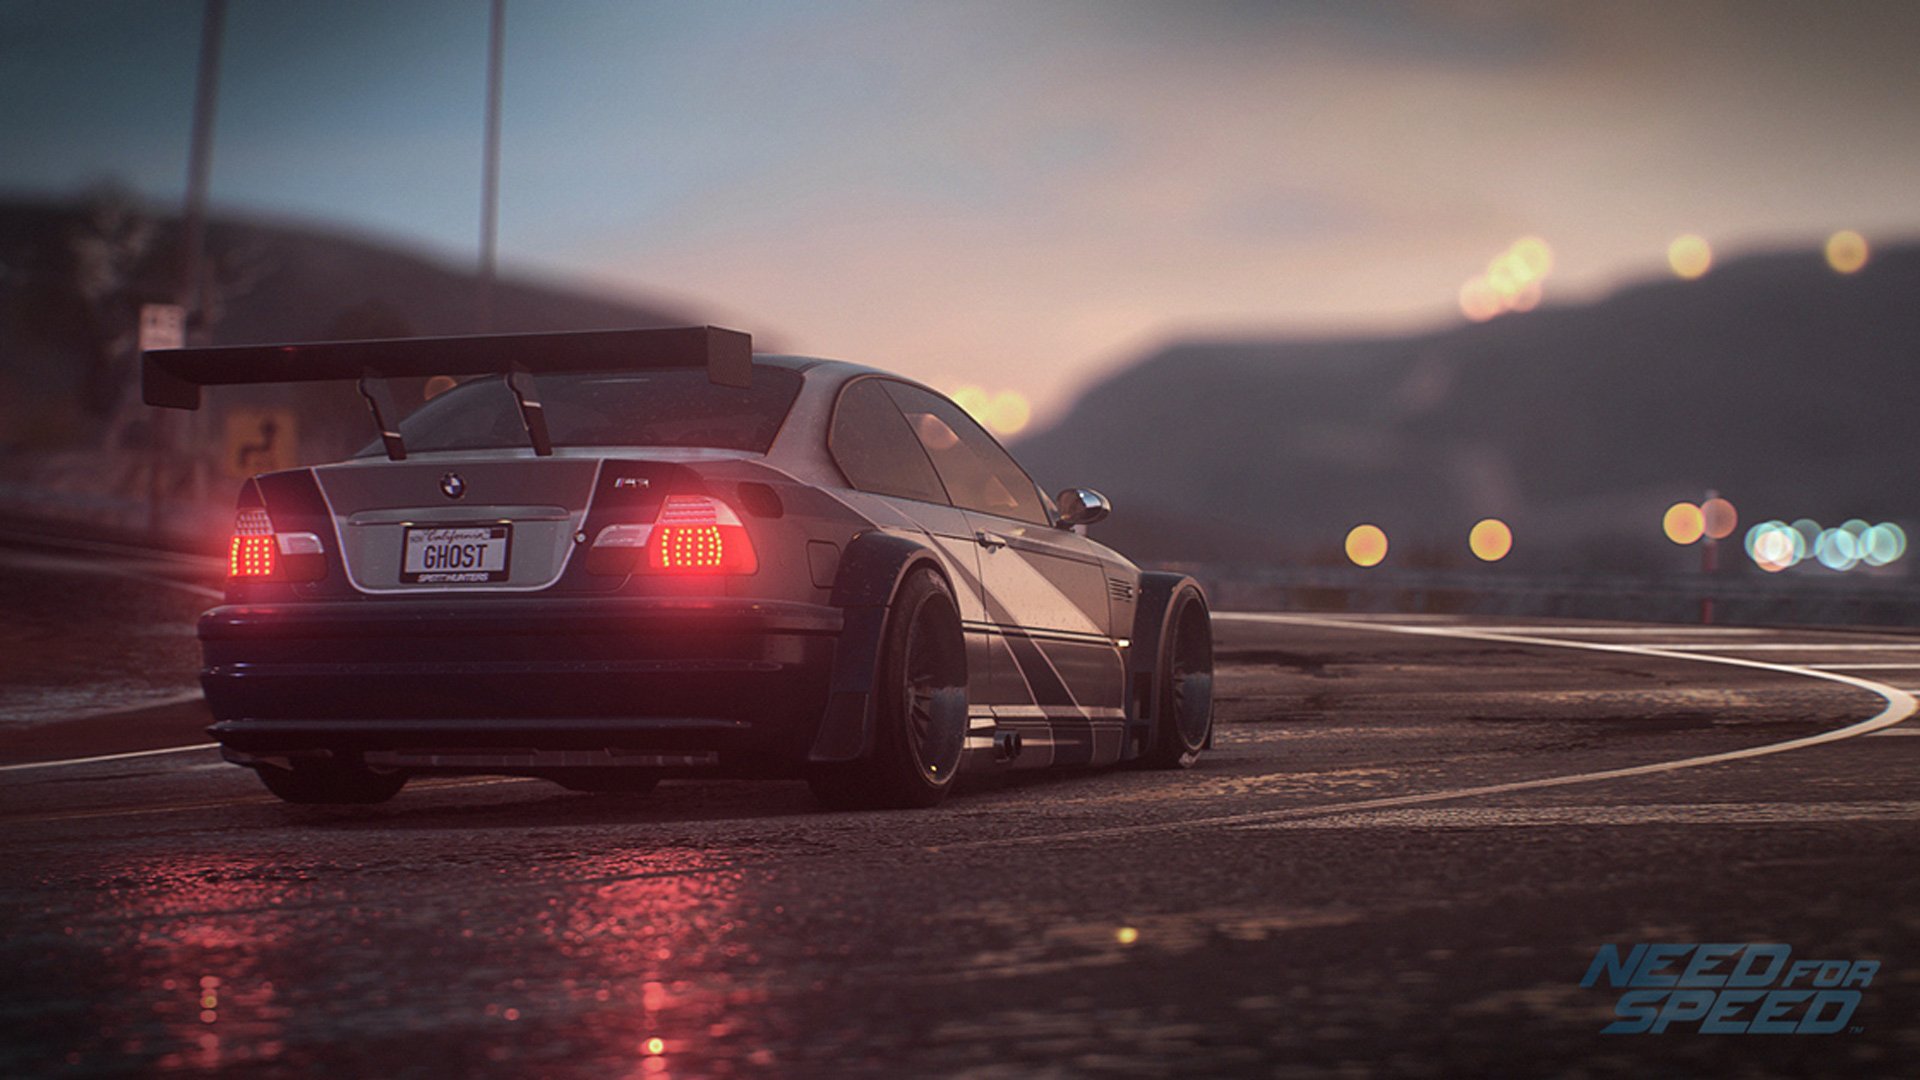 Bmw M3 E46 Gtr Need For Speed Wallpaper